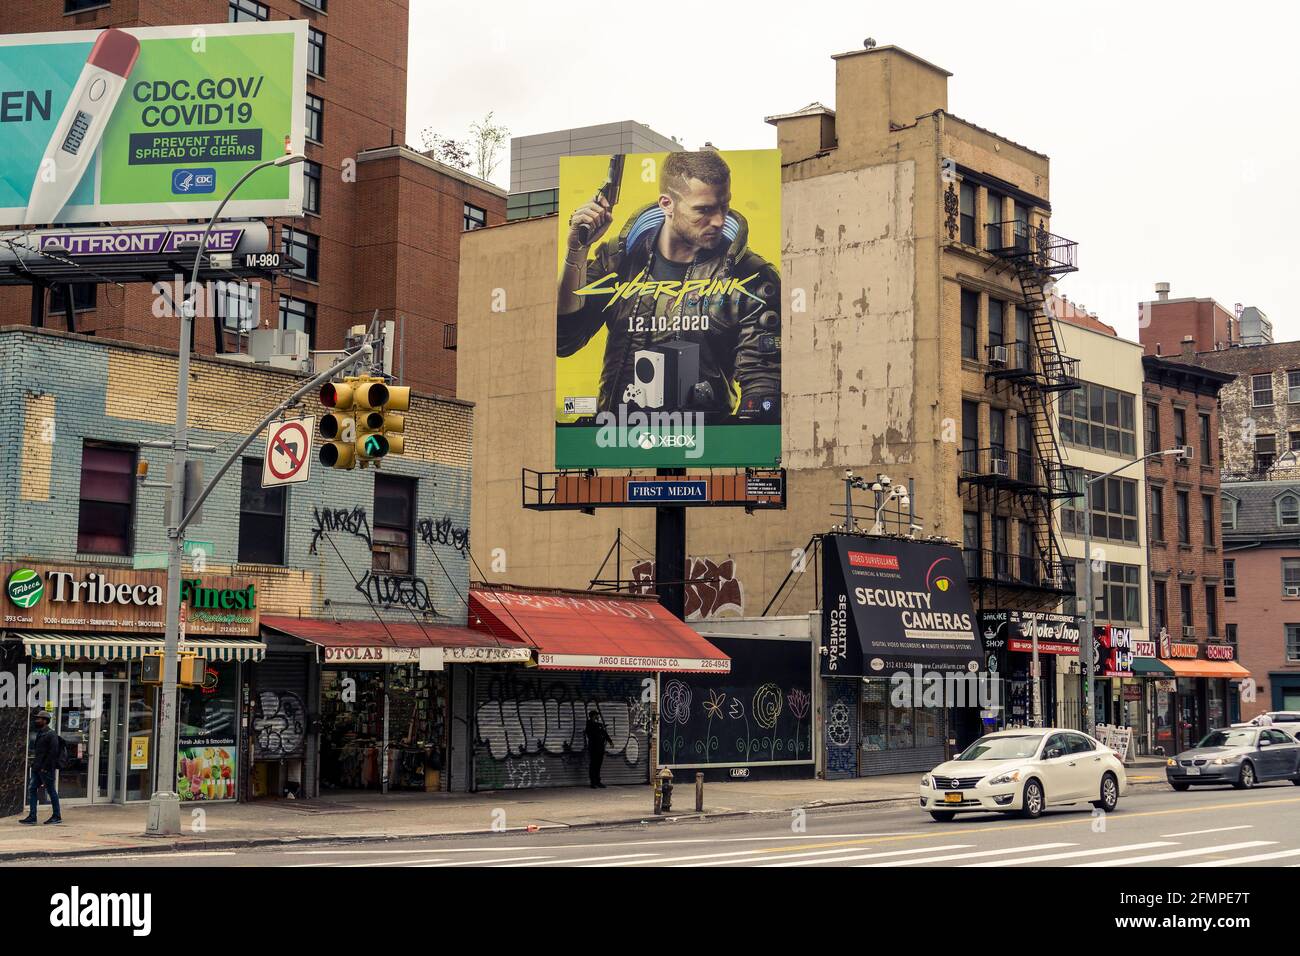 https://c8.alamy.com/comp/2FMPE7T/new-york-usa-09th-may-2021-a-billboard-advertising-the-video-game-cyberpunk-2077-on-canal-street-in-soho-in-new-york-on-sunday-may-9-2021-the-game-featuring-keanu-reeves-avatar-was-roundly-panned-on-its-release-due-to-its-many-glitches-photo-by-richard-b-levine-credit-sipa-usaalamy-live-news-2FMPE7T.jpg